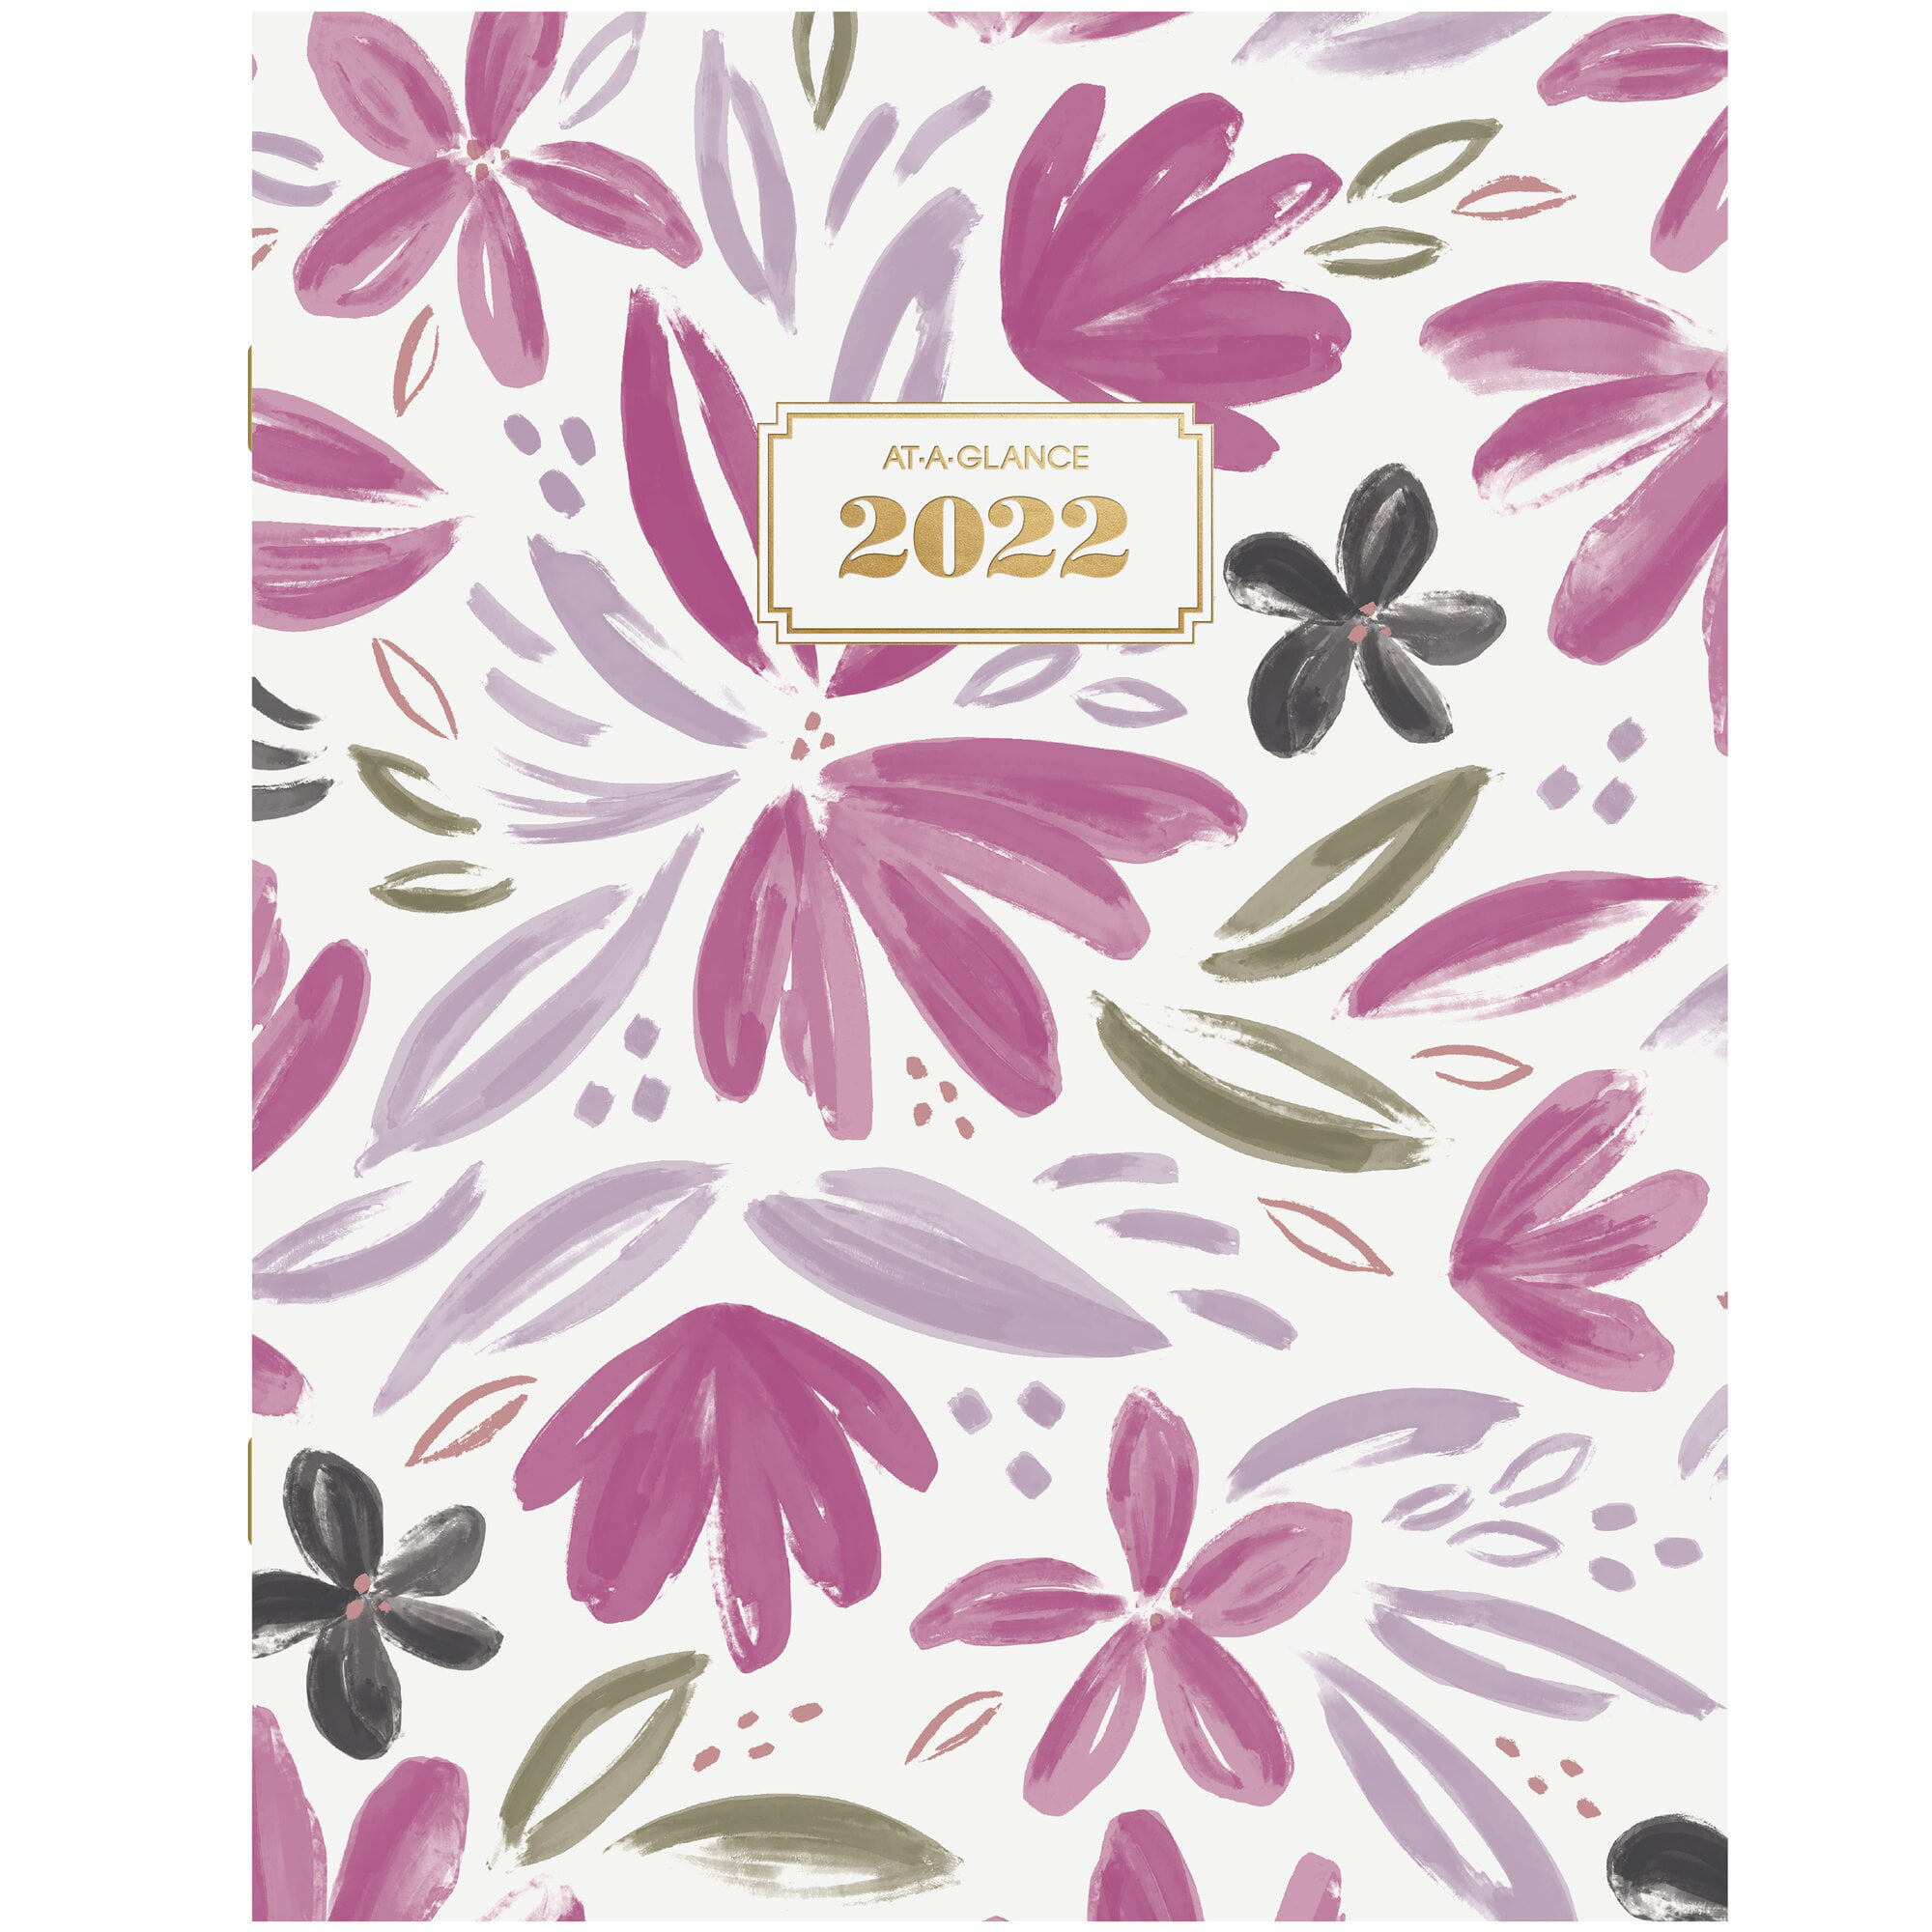 3-1/2 x 6 2 Year Monthly Planner 2022-2023 Pocket Calendar by AT-A-GLANCE BADGE Floral Pocket Size 1565F-021